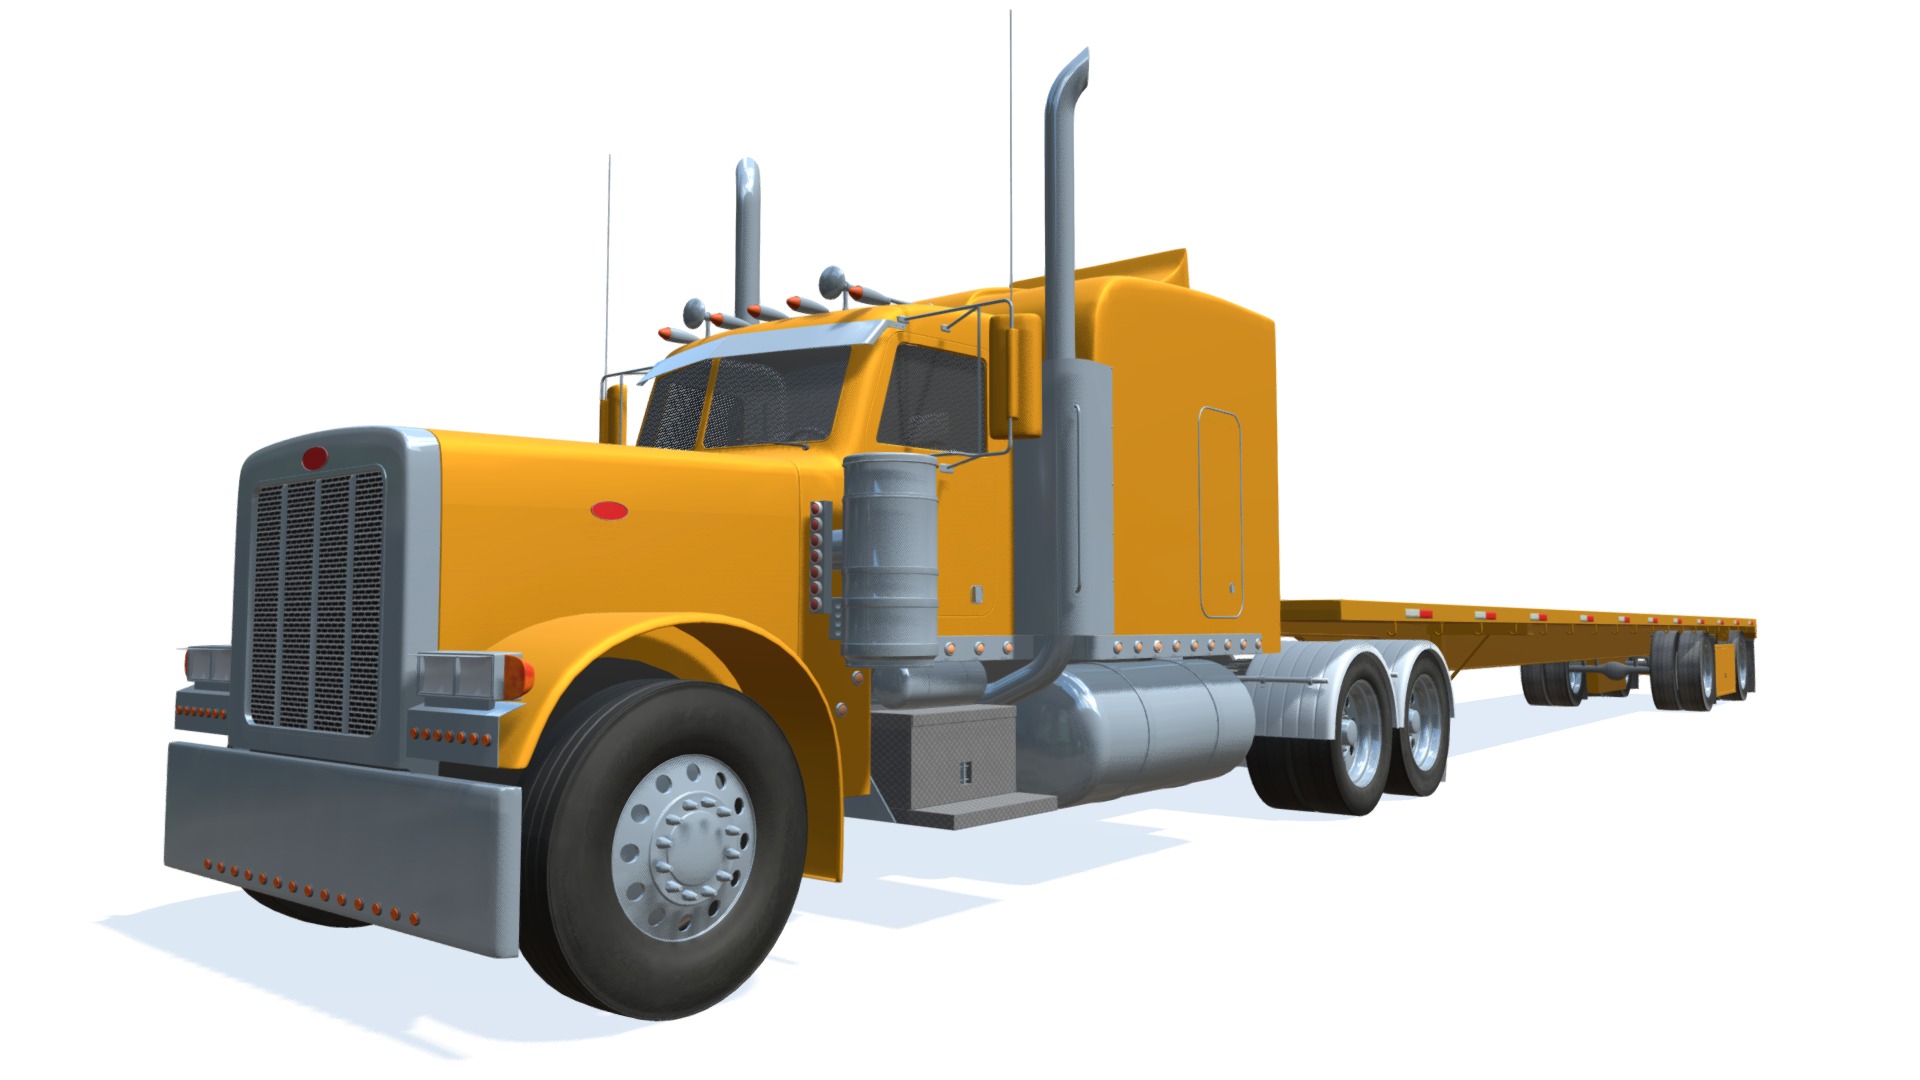 3D model American Truck Flatbed - This is a 3D model of the American Truck Flatbed. The 3D model is about a large yellow and black forklift.